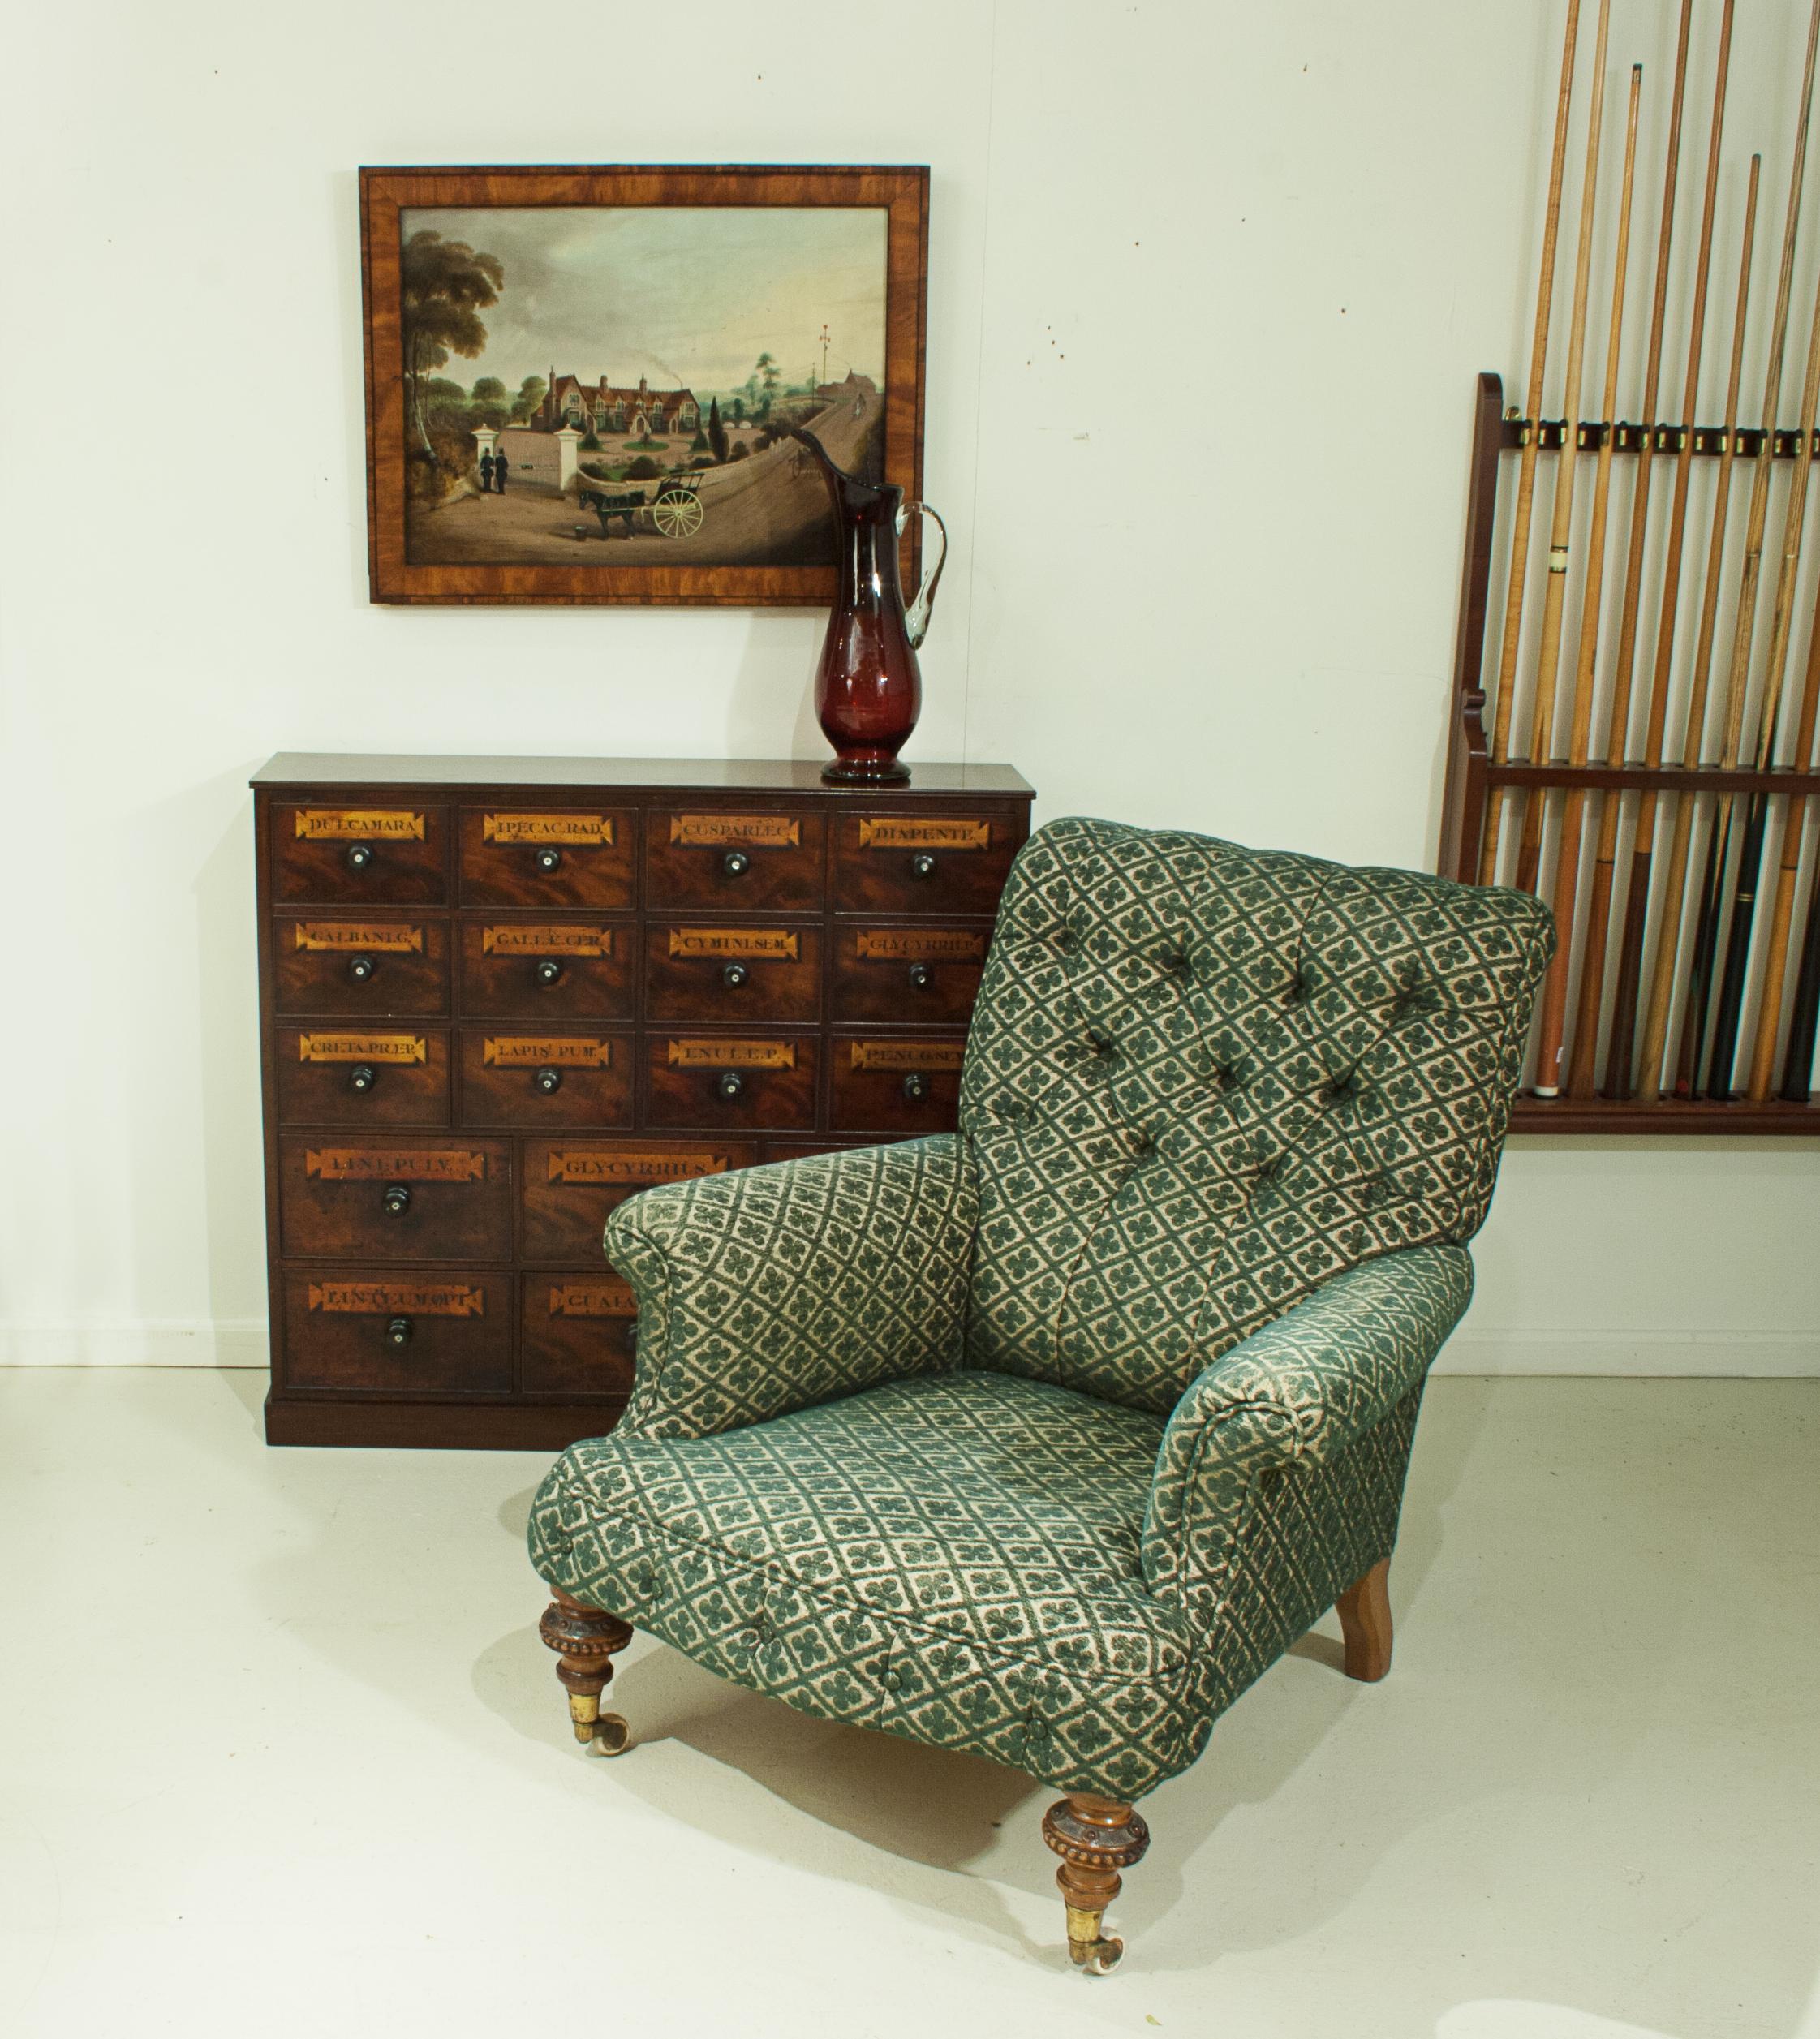 Howard style button back armchair.
A 19th century Howard style button back upholstered armchair with walnut turned front legs and square sweeping back rear legs. The front legs raised on cup castors with white ceramic wheels.

The name of Howard